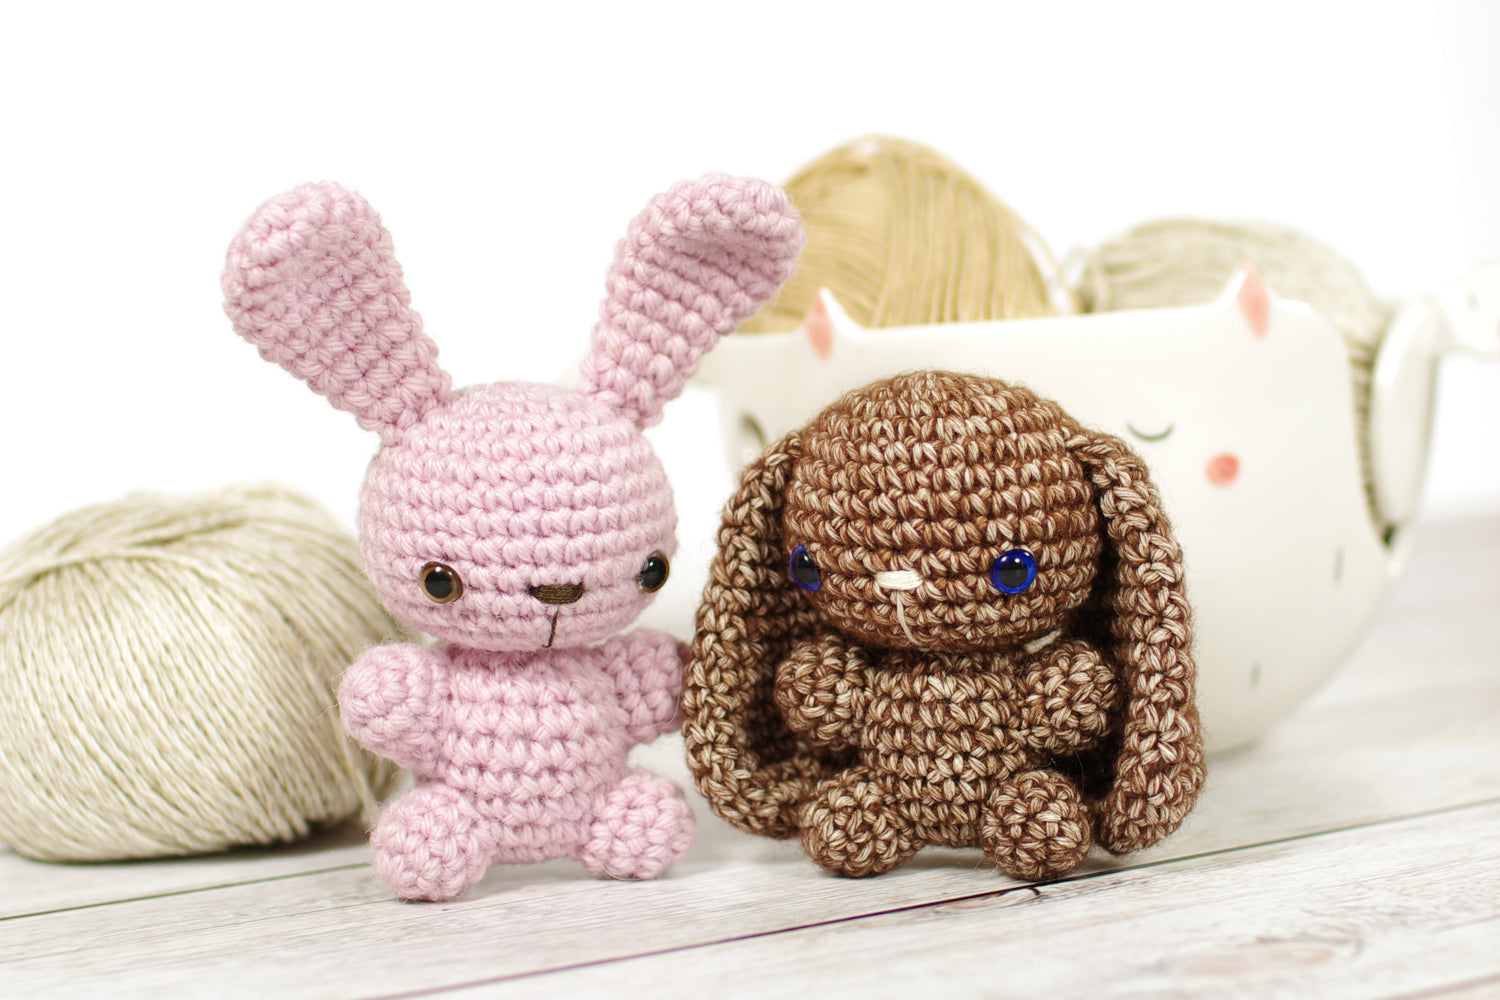 Six Mommy and Baby Animal Crochet Patterns - Moonbeam Stitches